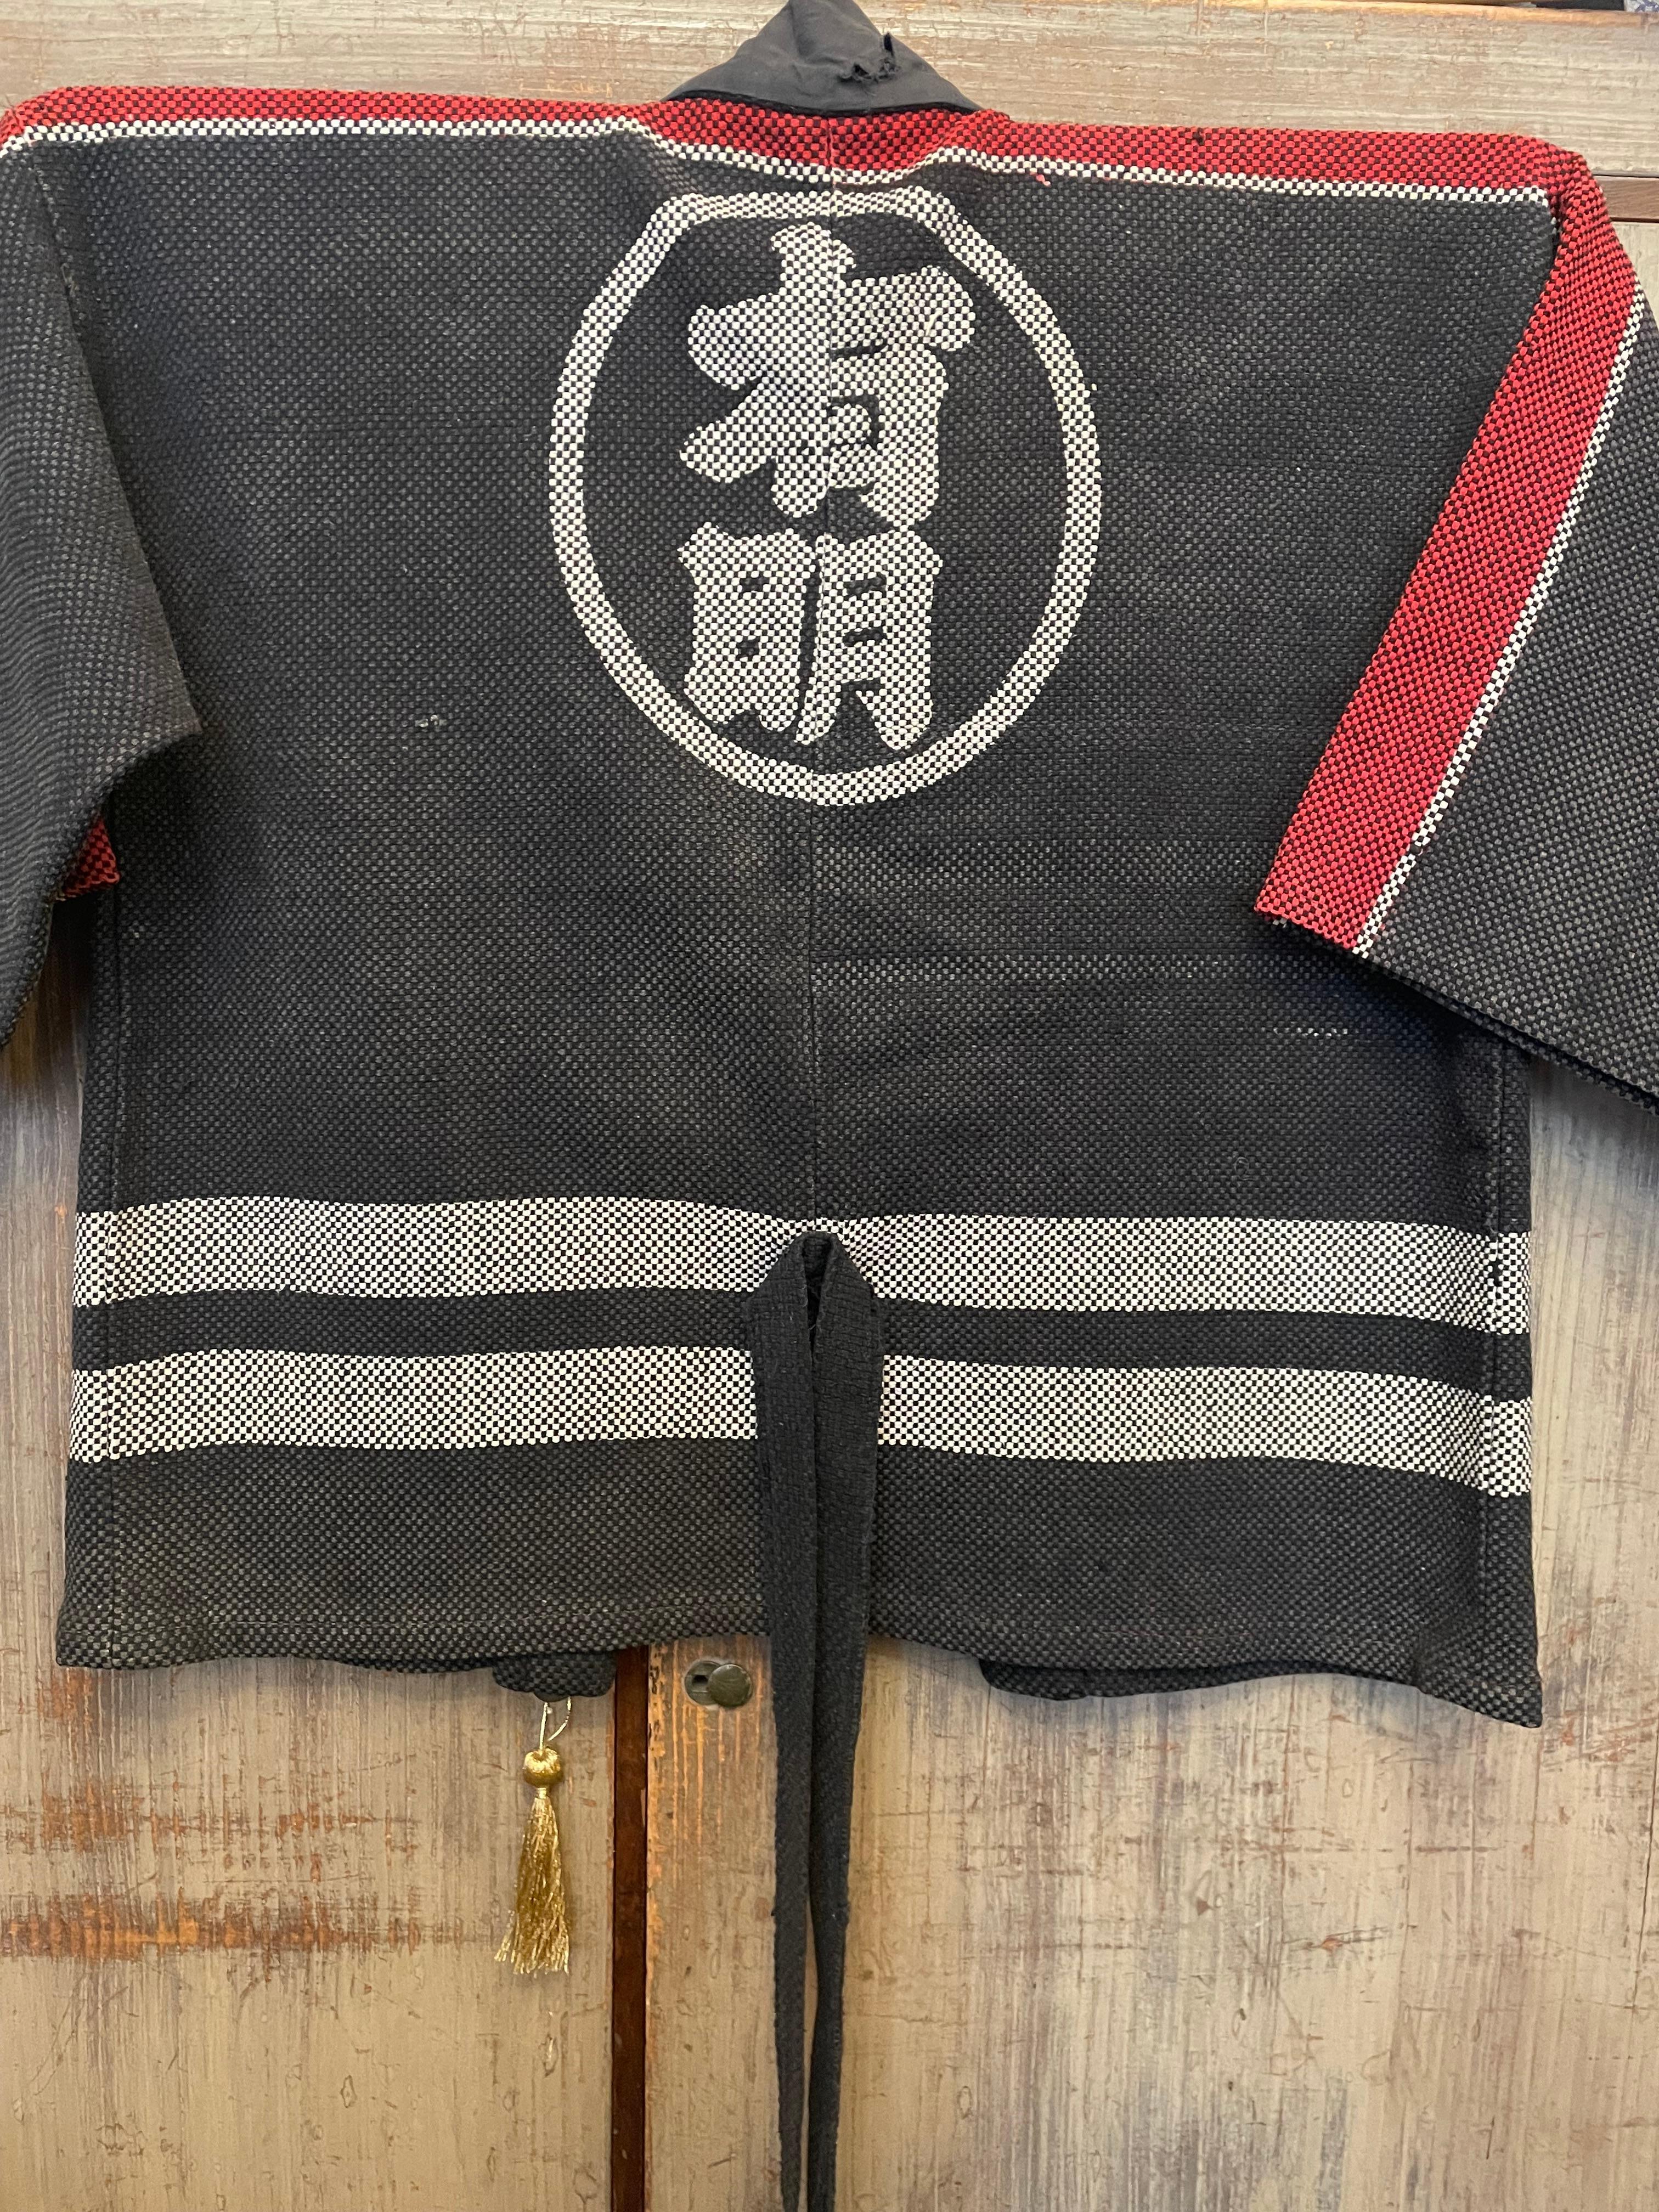 This Sashiko b(h)anten was made around 1960 in Showa era in Japan. 
On the front, it is written 'Member of Vigilance Committee Ariake ' in Japanese. On the back, it is written 'ariake' which means a town name in Tokyo prefecture.
This sashiko banten